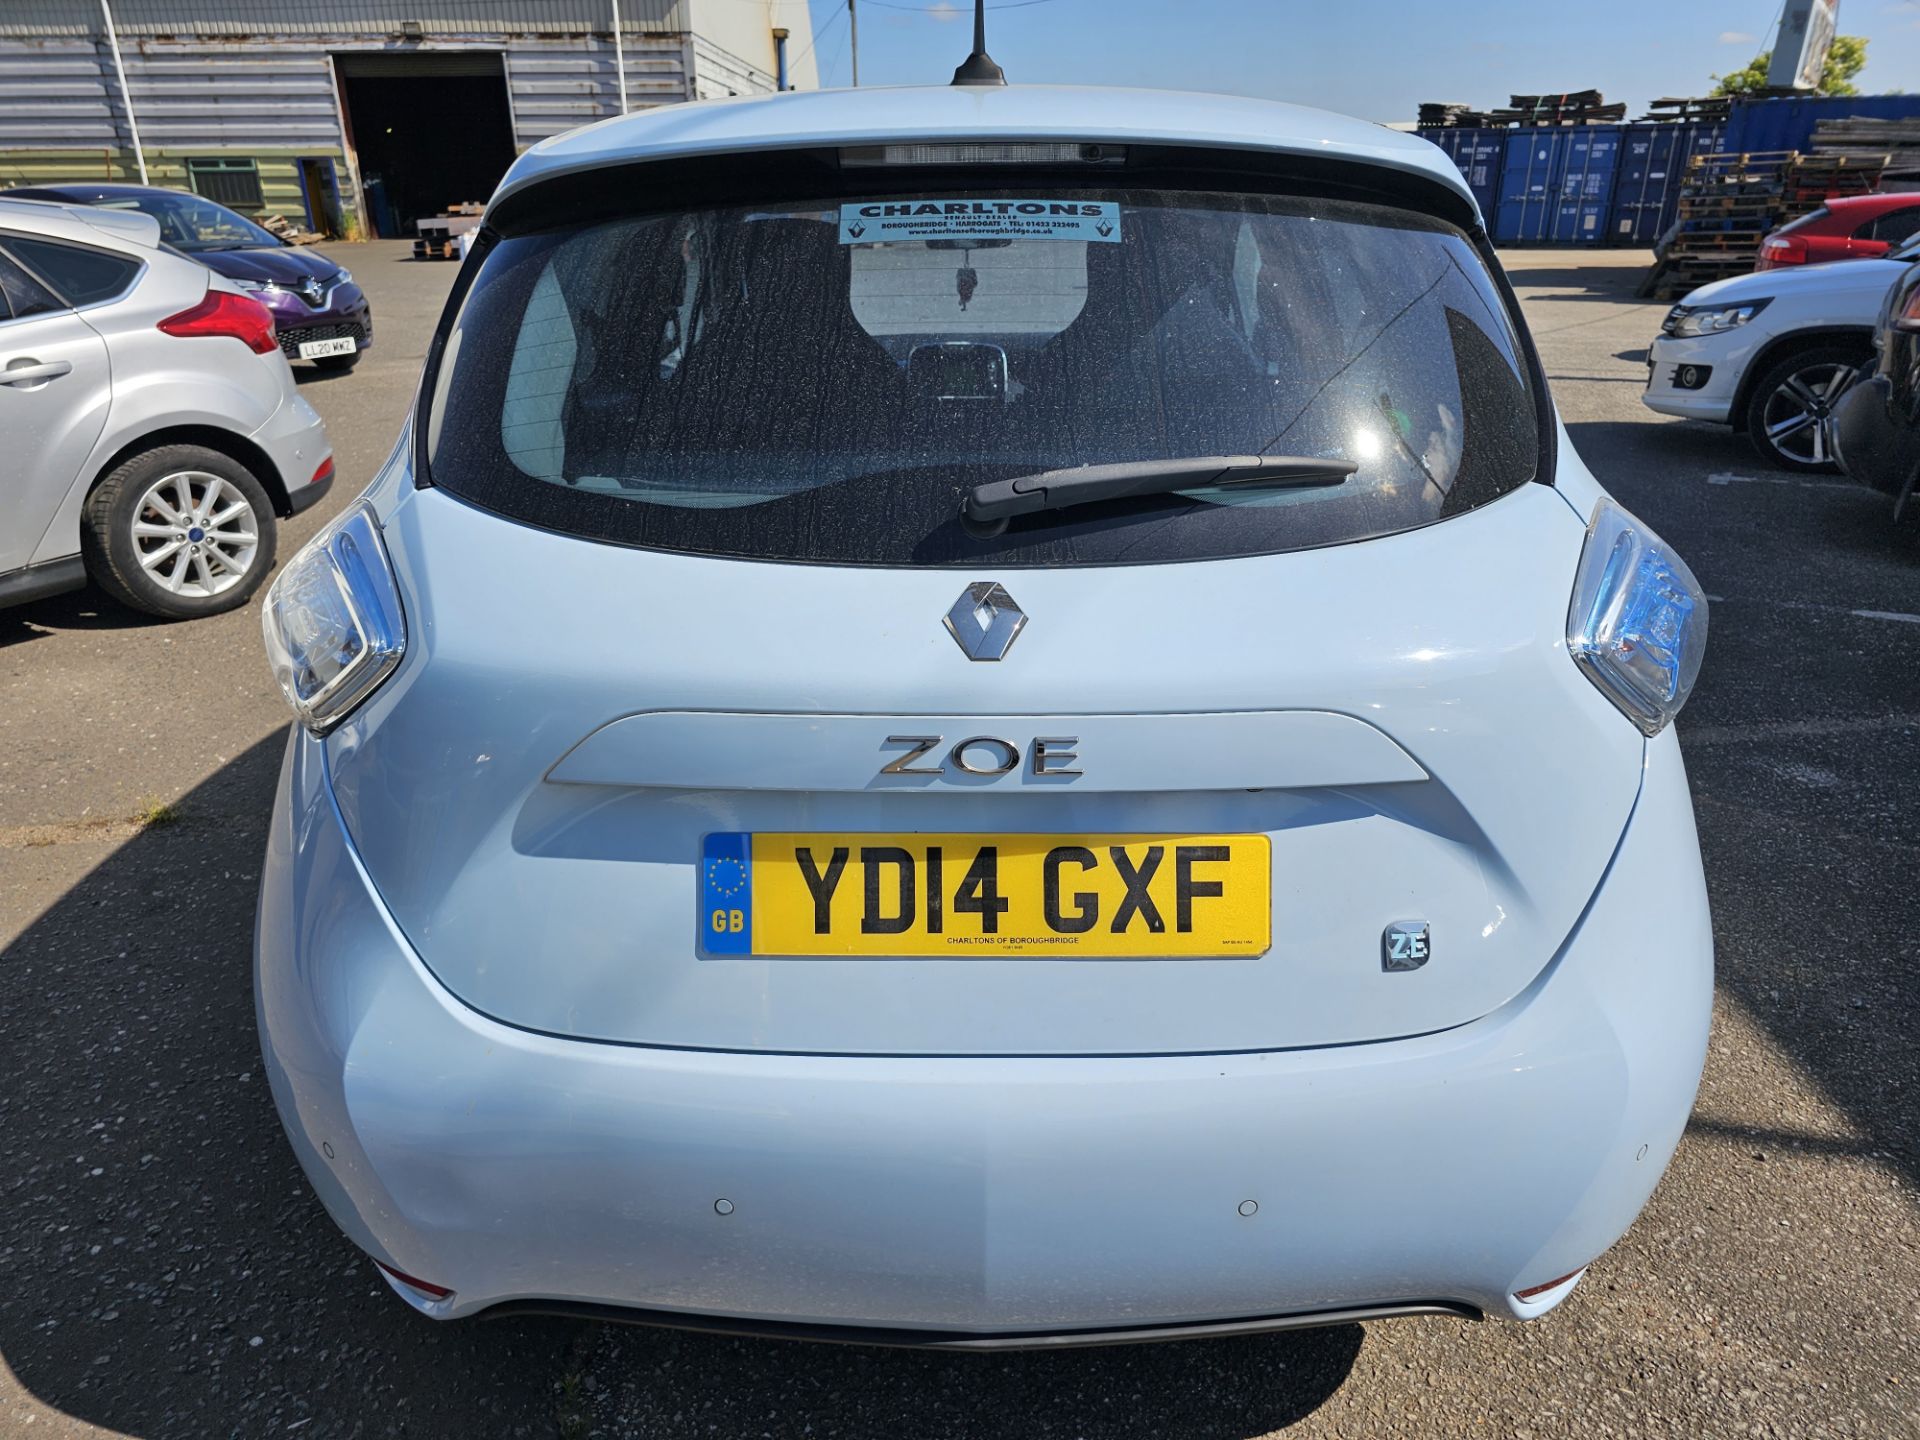 2014/14 REG RENAULT ZOE DYNAMIQUE INTENSE AUTOMATIC ELECTRIC HATCHBACK, SHOWING 1 FORMER KEEPER - Image 6 of 26